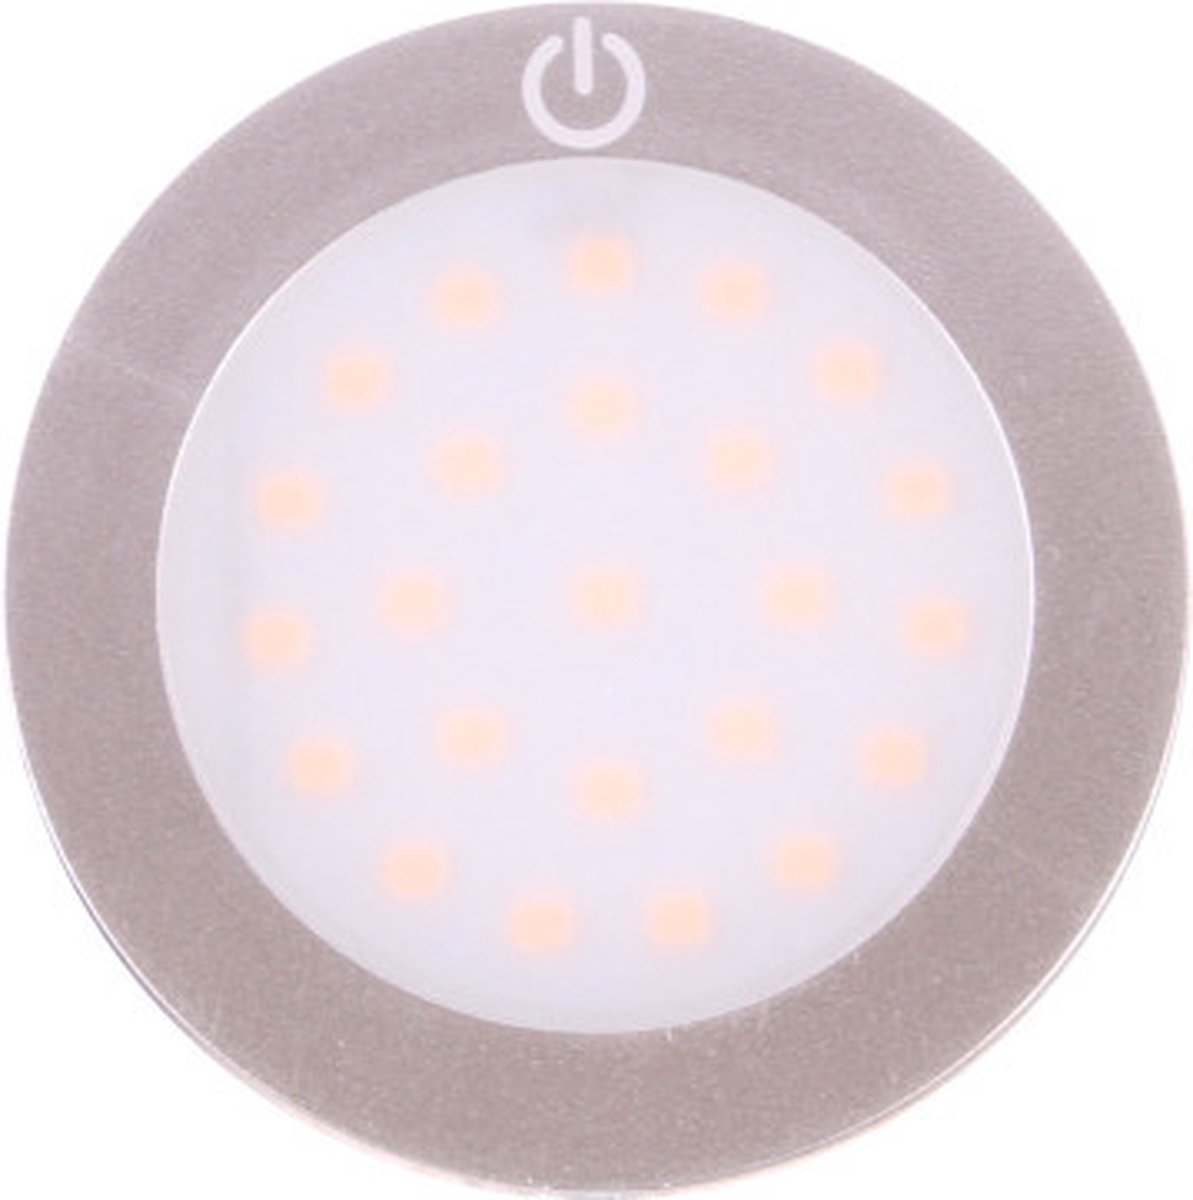 Opbouwspot LED Rond Touch 2W